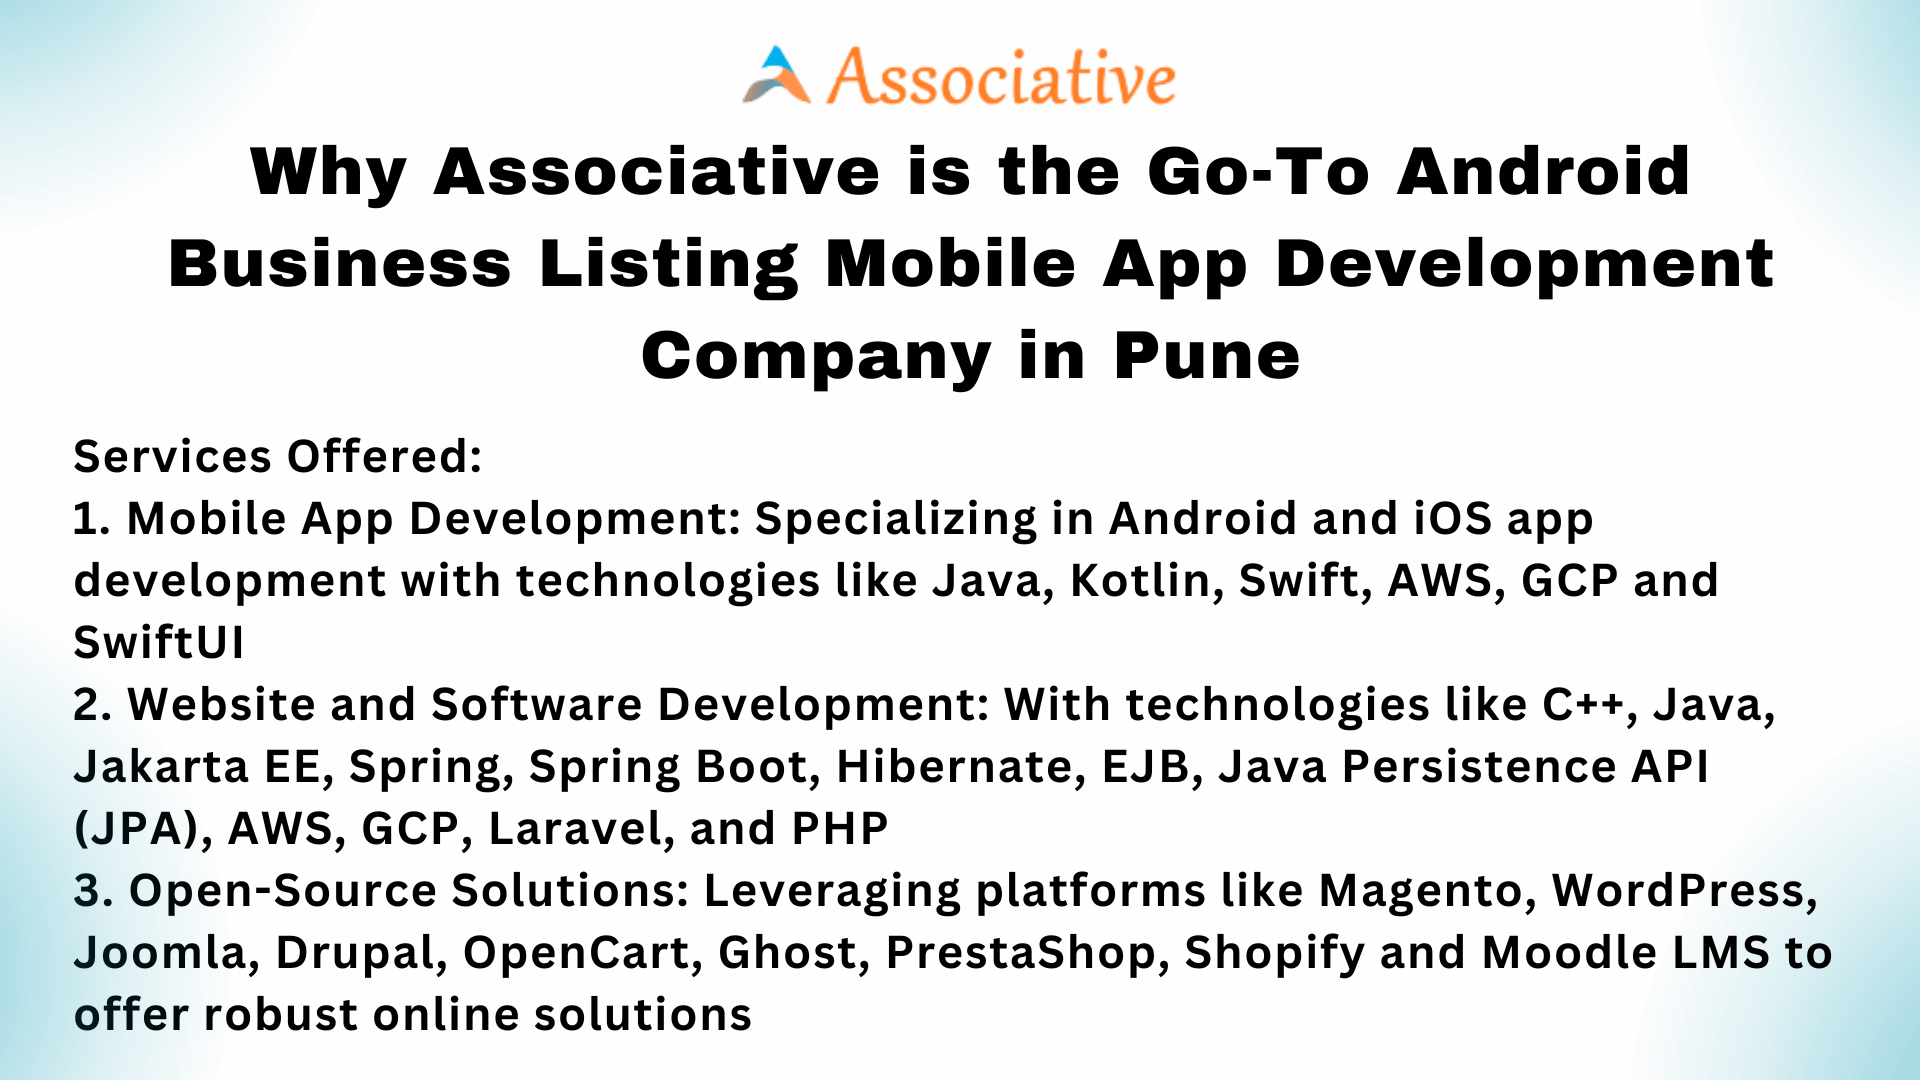 Why Associative is the Go-To Android Business Listing Mobile App Development Company in Pune